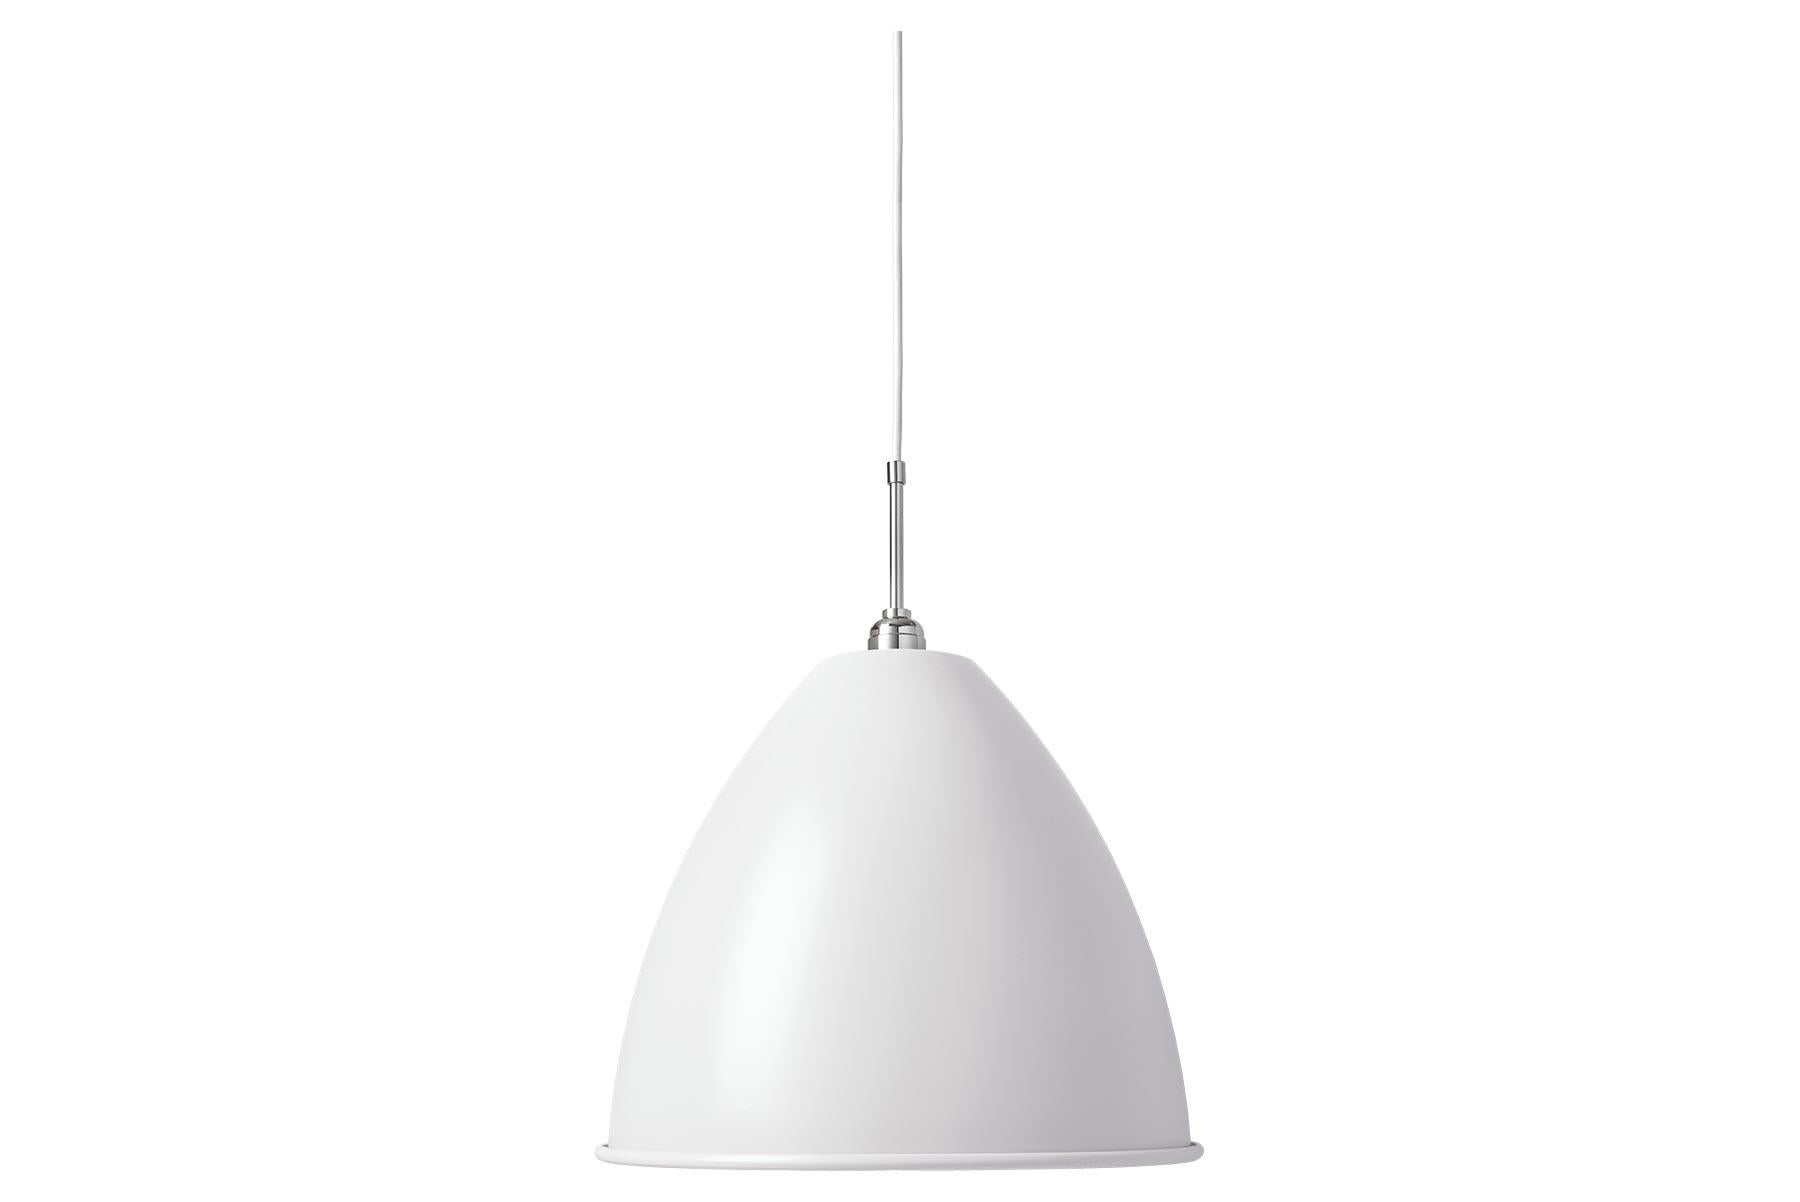 The Bestlite BL9 pendant in four sizes and in a numerous of finishes was designed in 1930 by the Bauhaus influenced British designer Robert Dudley Best. With its great heritage and contemporary look, the BL9 Pendant is a coveted design worldwide.